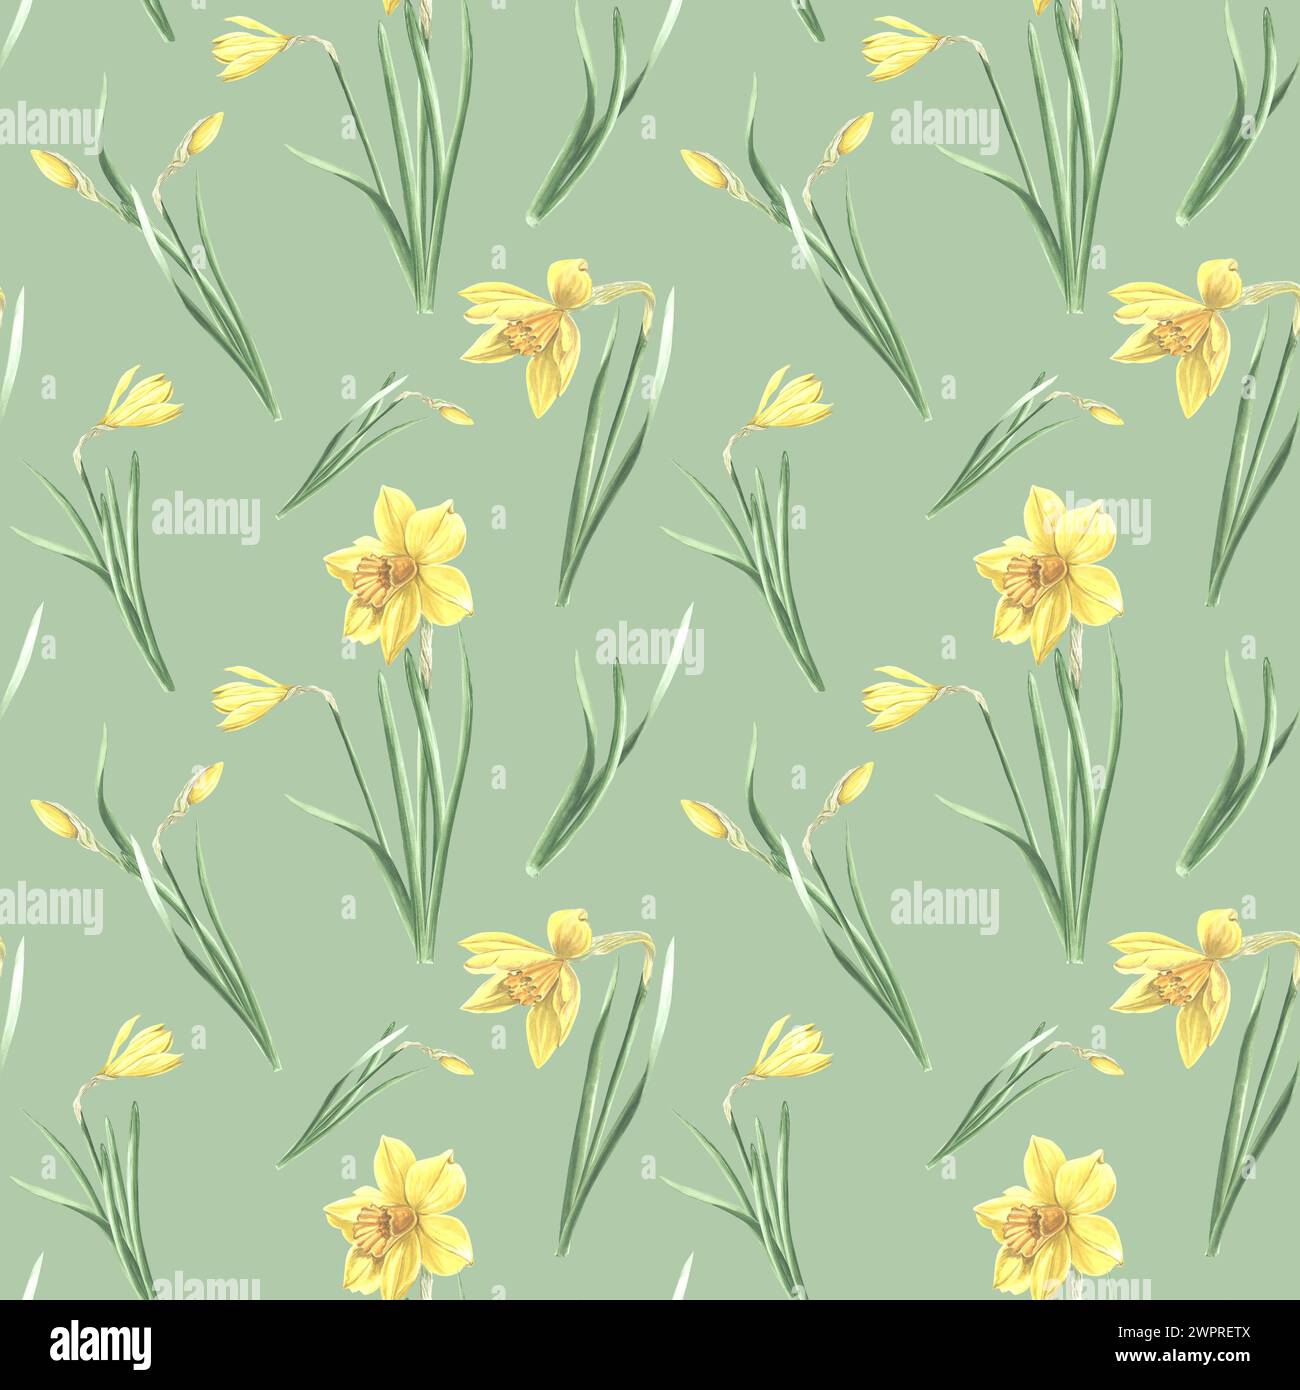 Seamless pattern from yellow daffodils with leaves on green background. Hand drawn watercolor illustration garden spring narcissus. Template for fabri Stock Photo